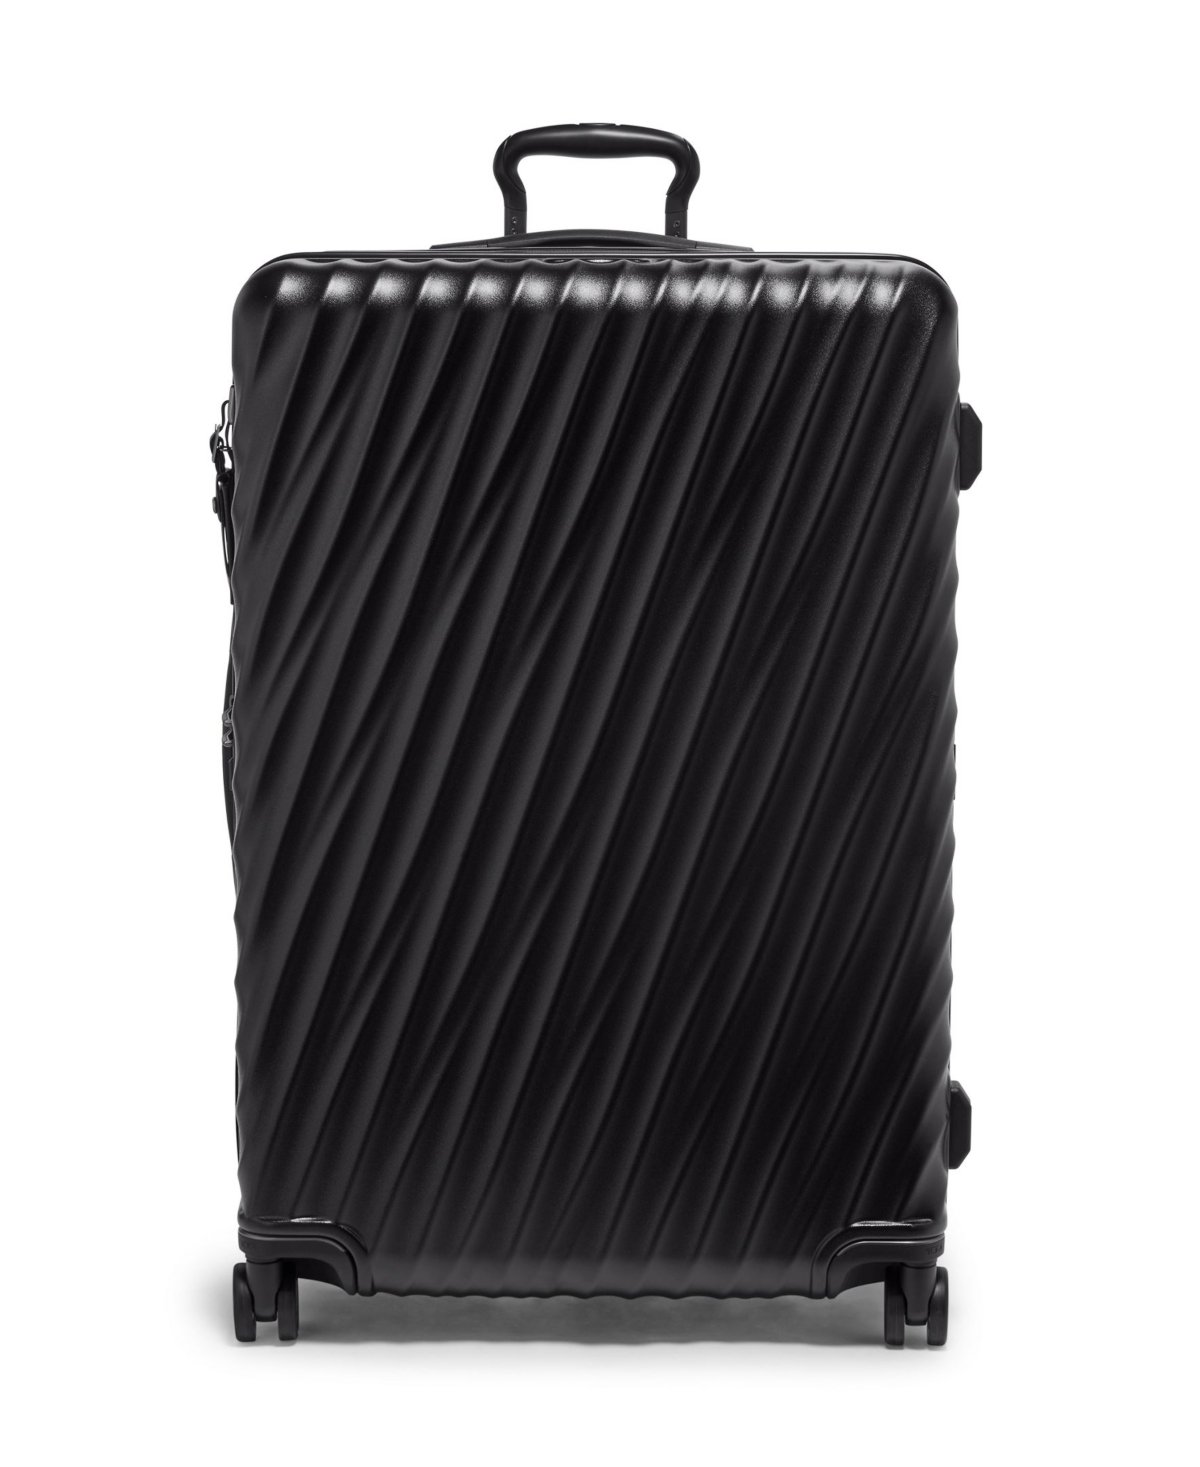 19 Degree Extended Trip Expandable Carry On - Black Texture